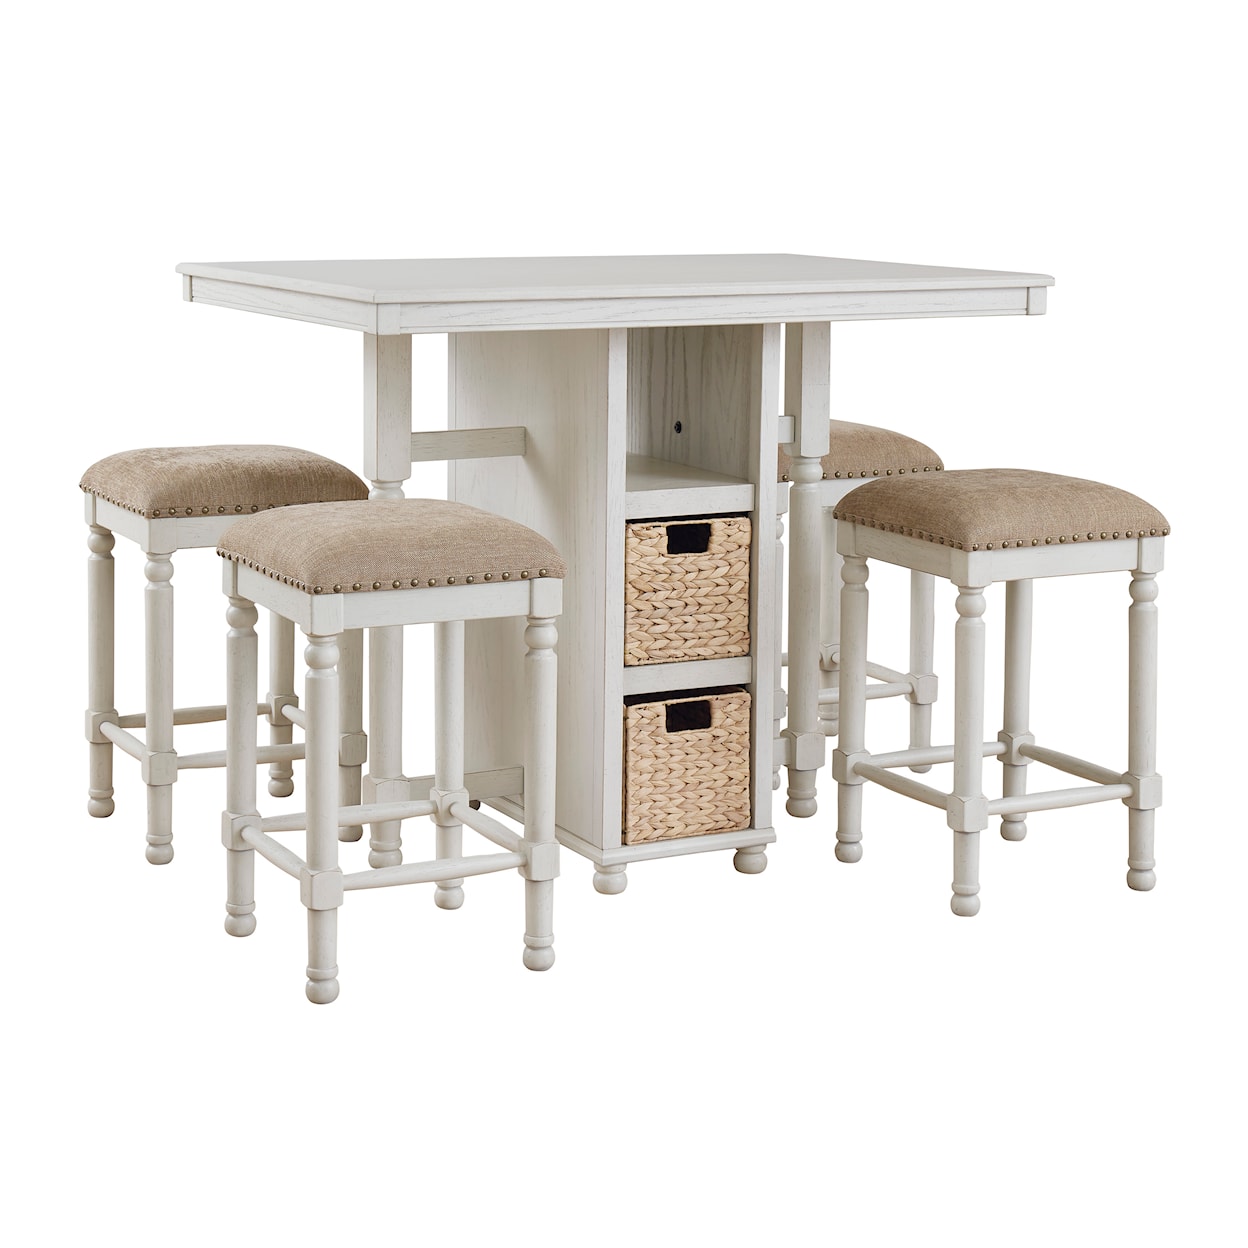 Benchcraft Robbinsdale Counter Table and Bar Stools (Set of 5)